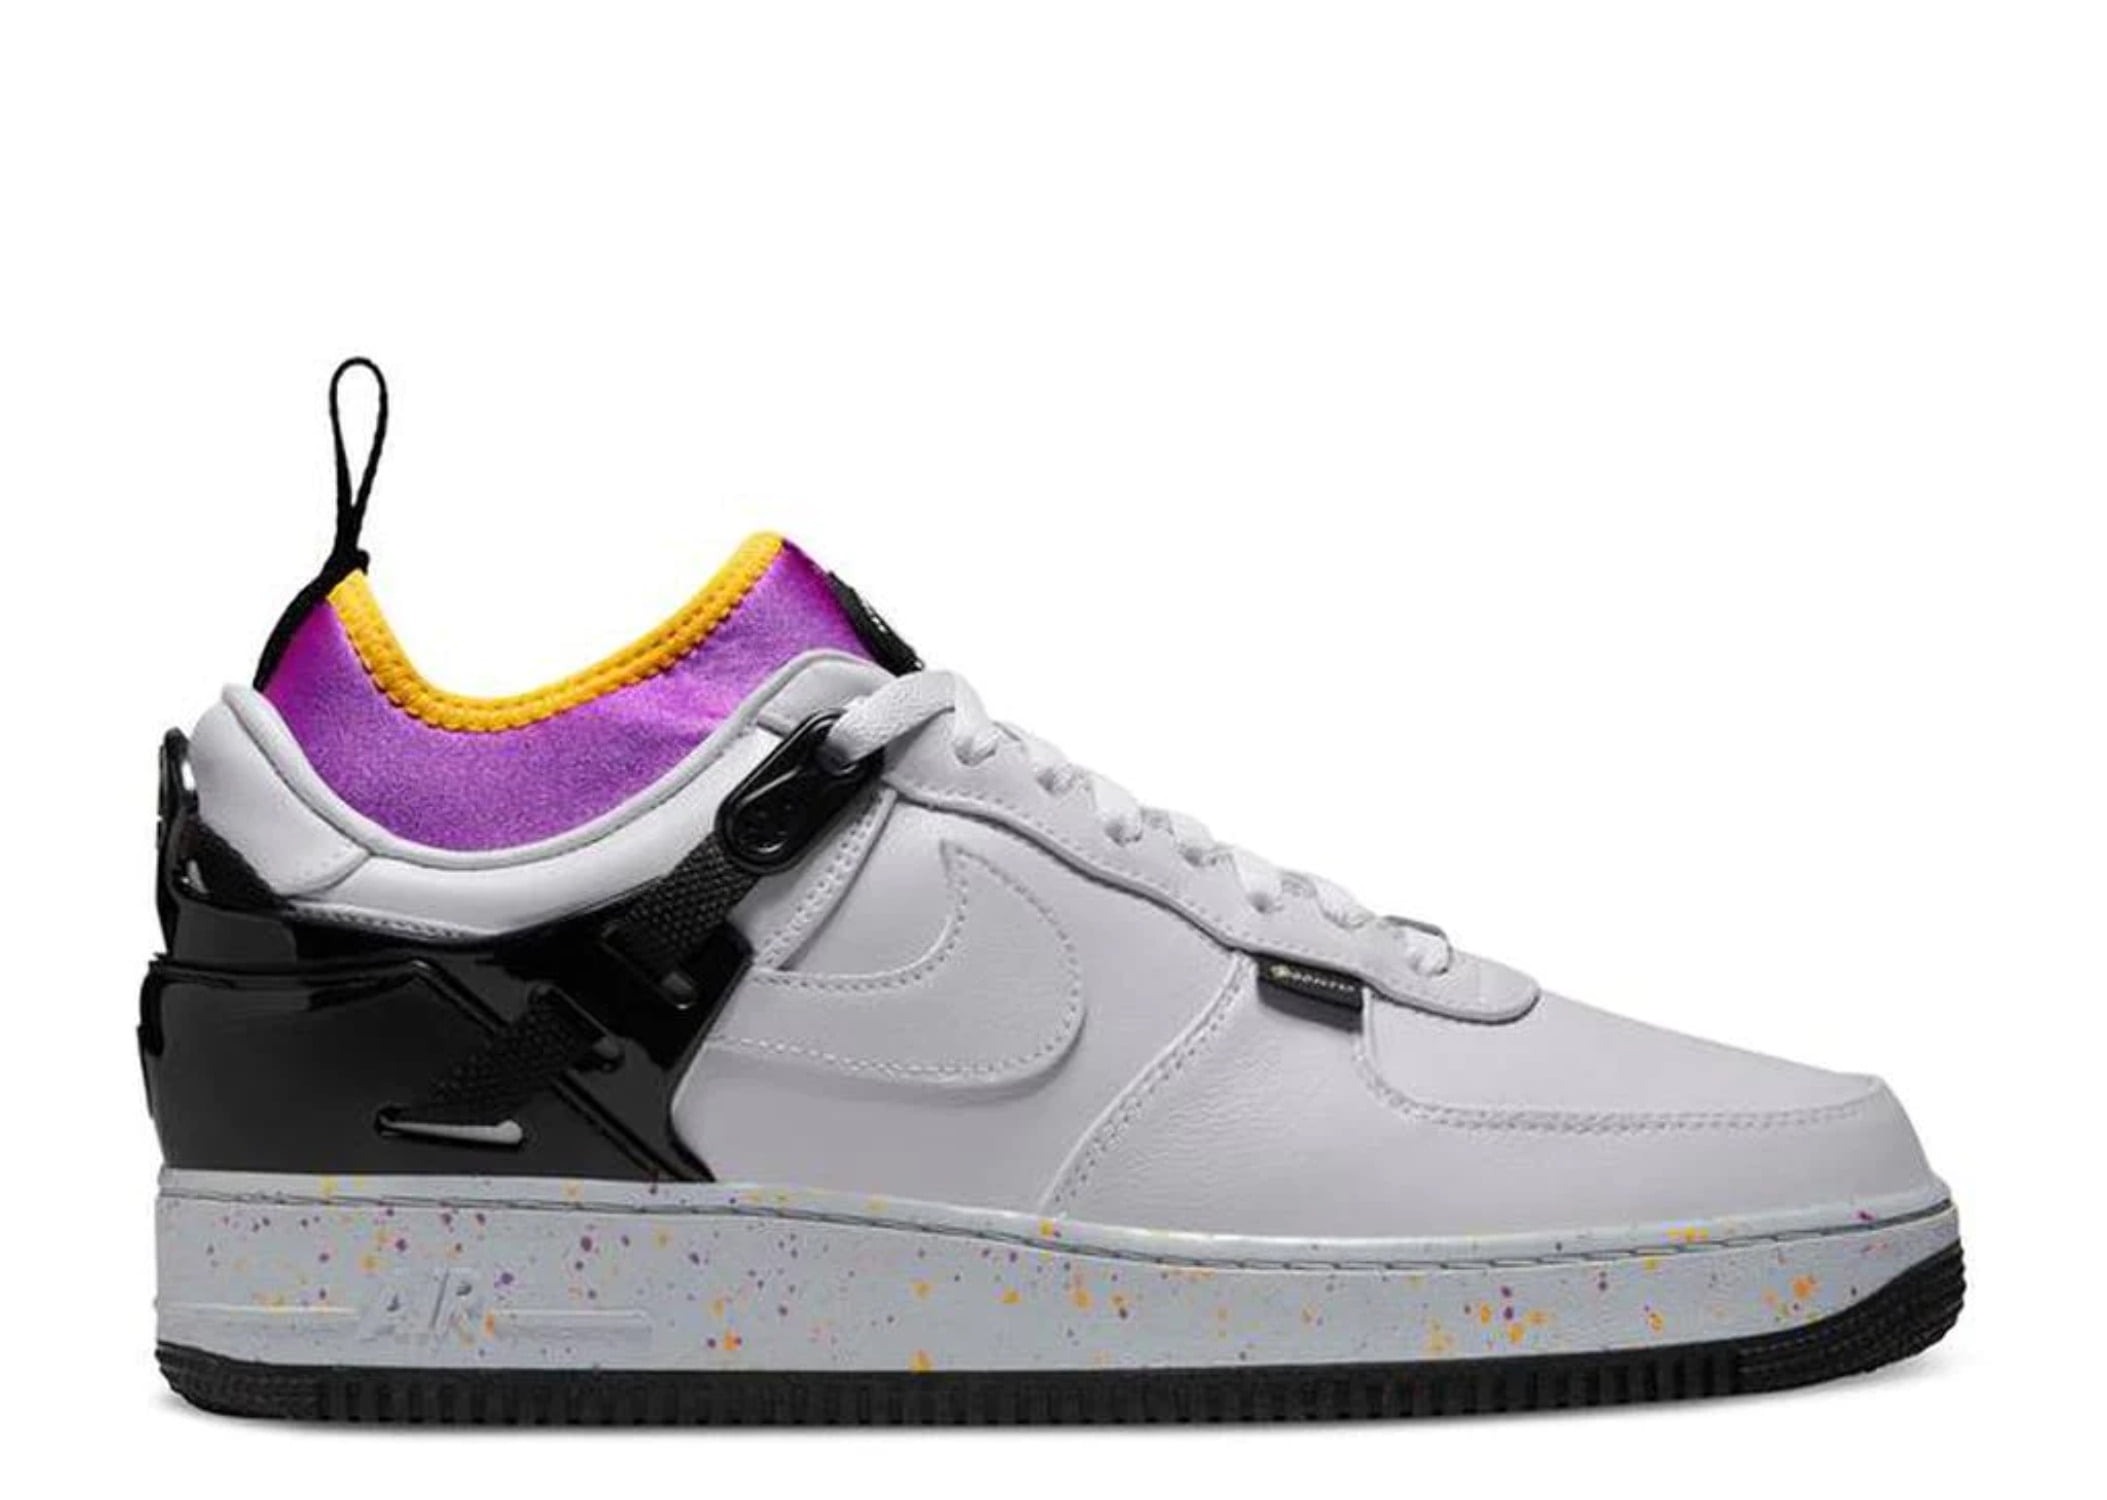 NIKE AIR FORCE 1 LOW SP X UNDERCOVER GORE-TEX 'GREY FOG' - DQ7558